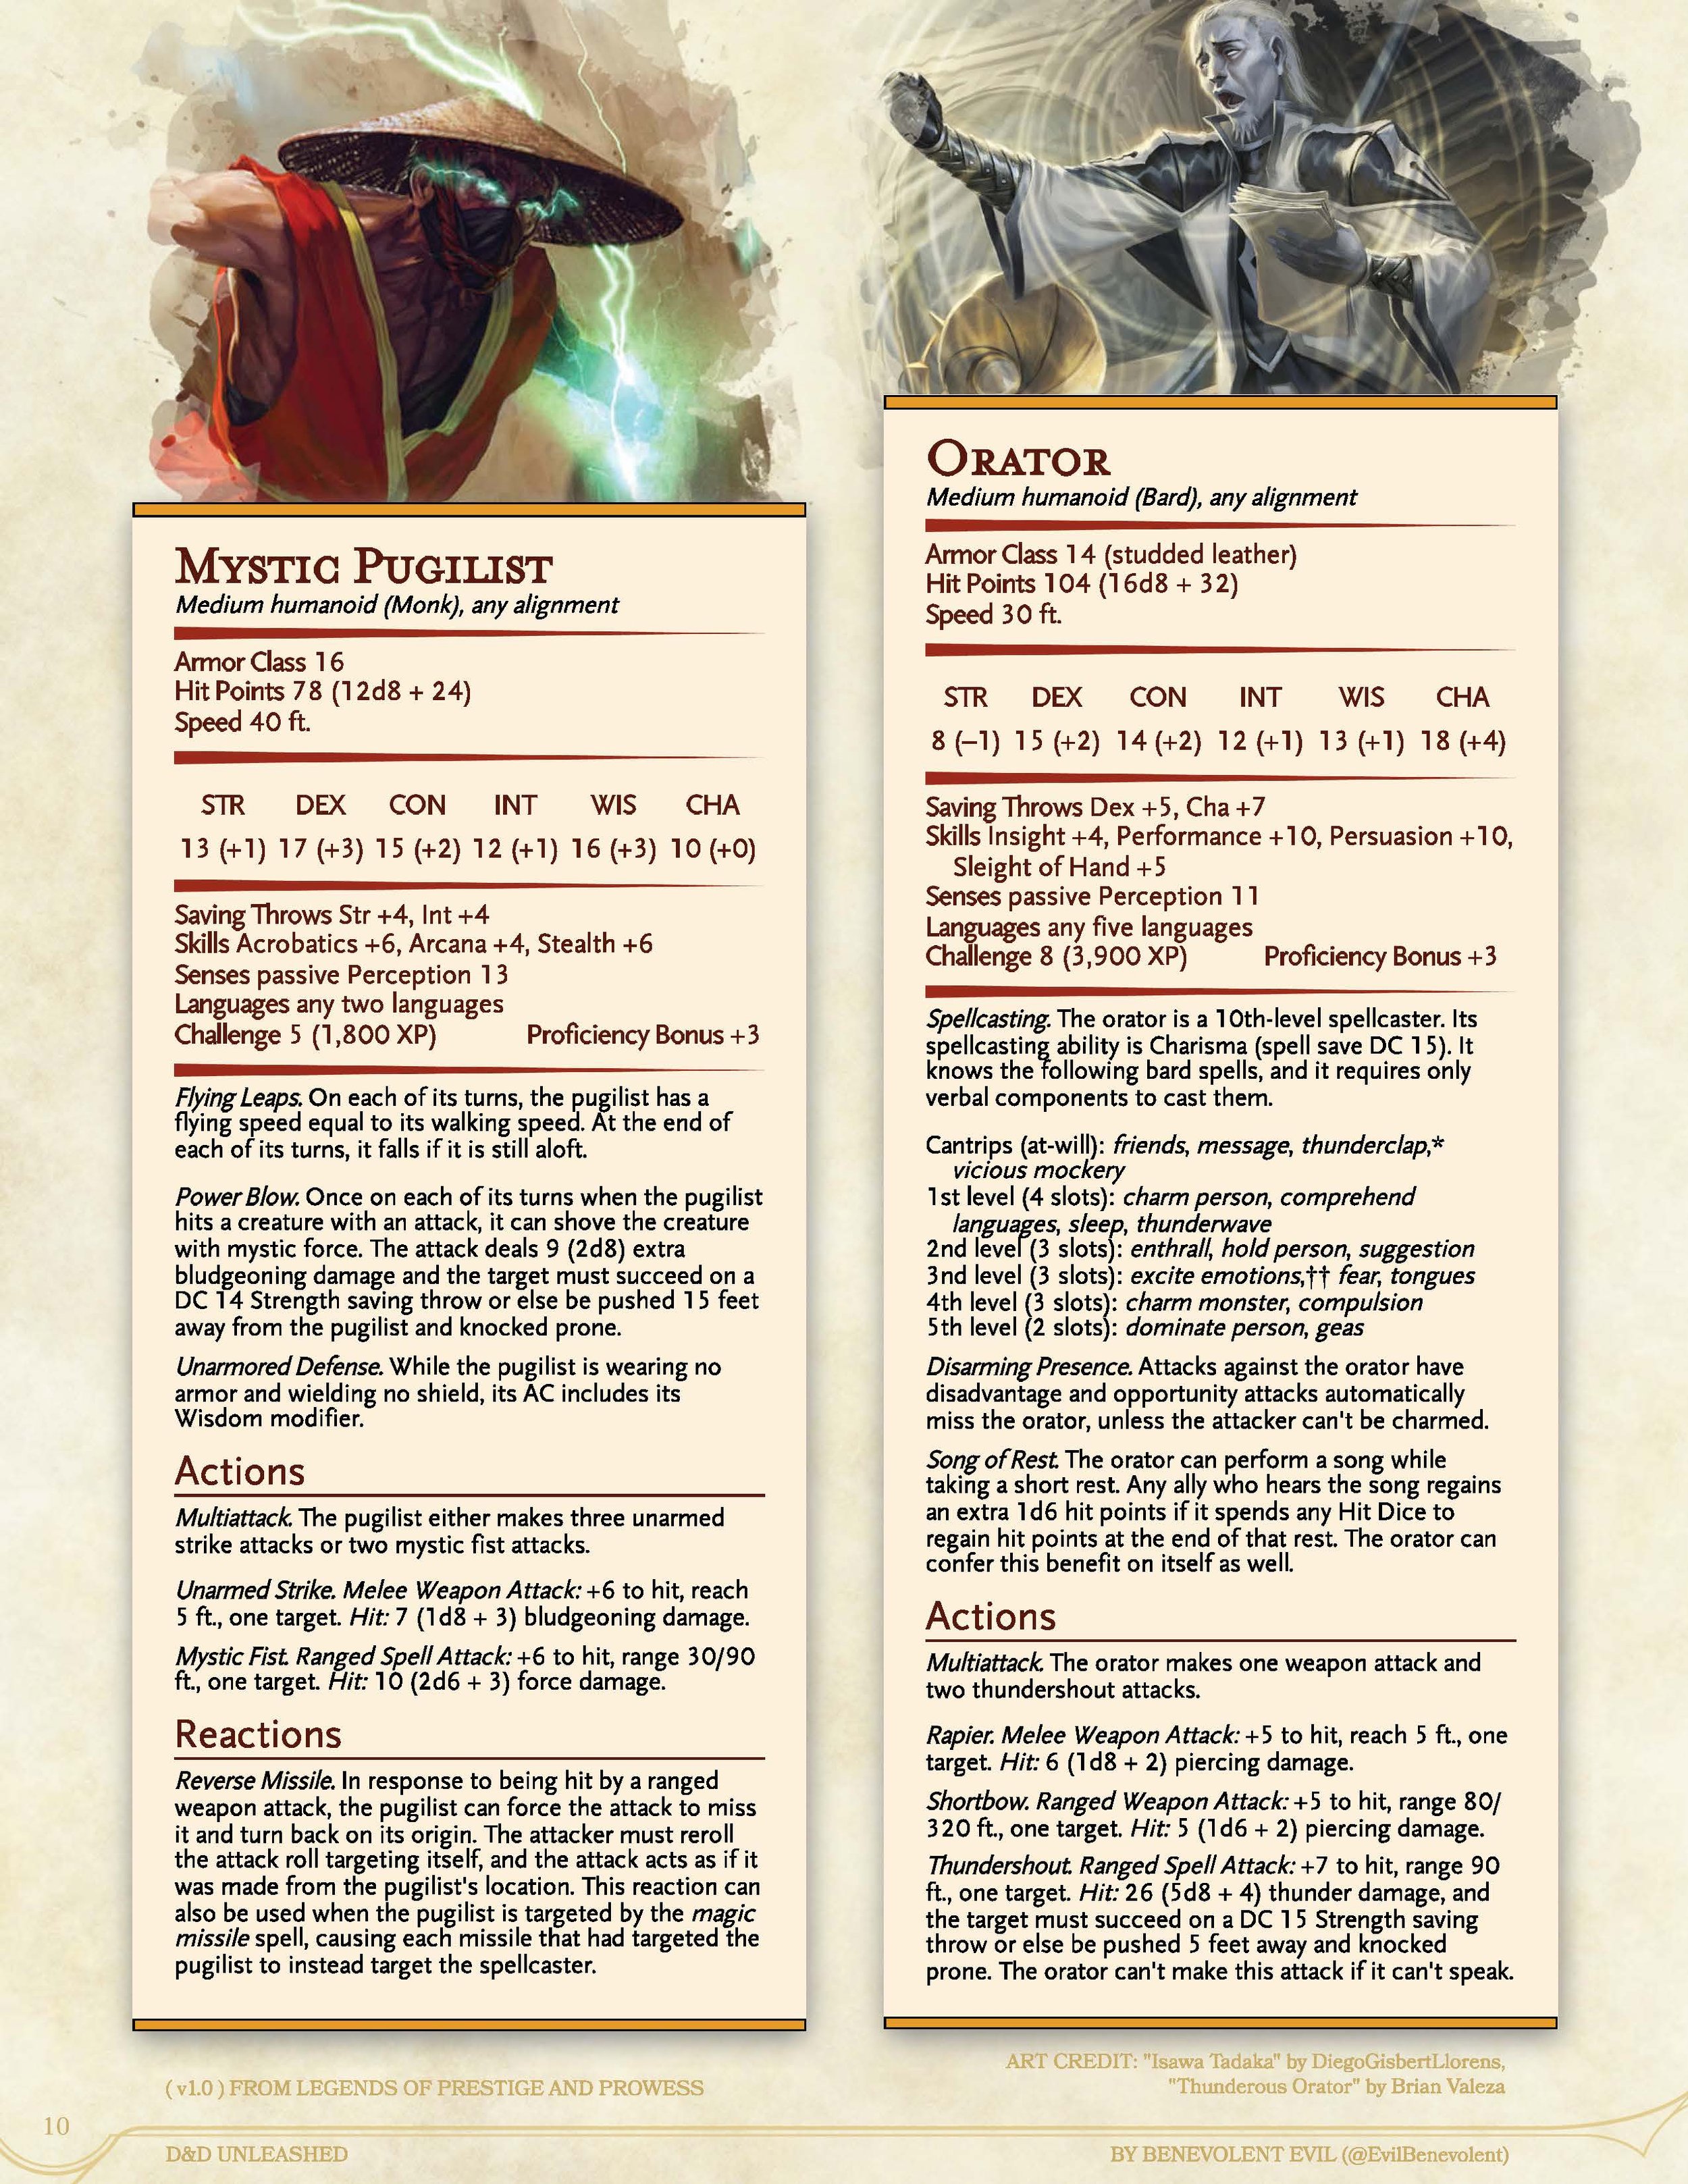 D&D Unleashed - Assorted Humanoid NPCs (v1_0)_Page_10.jpg